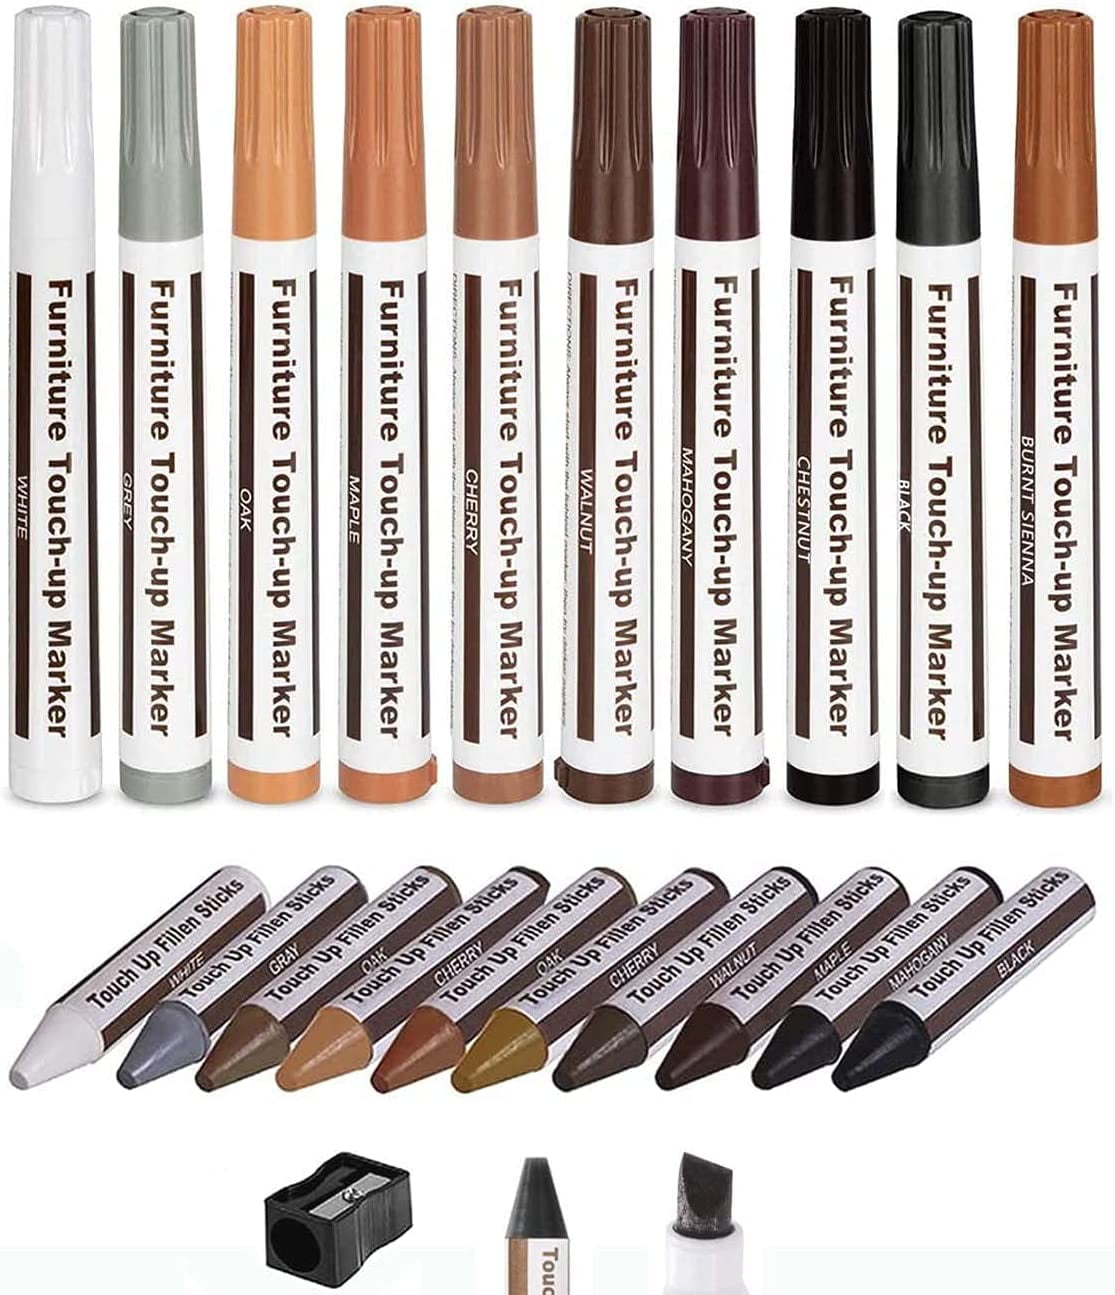 Katzco Furniture Repair Kit Wood Markers - Set of 13 - Light Colored Markers  and Wax 